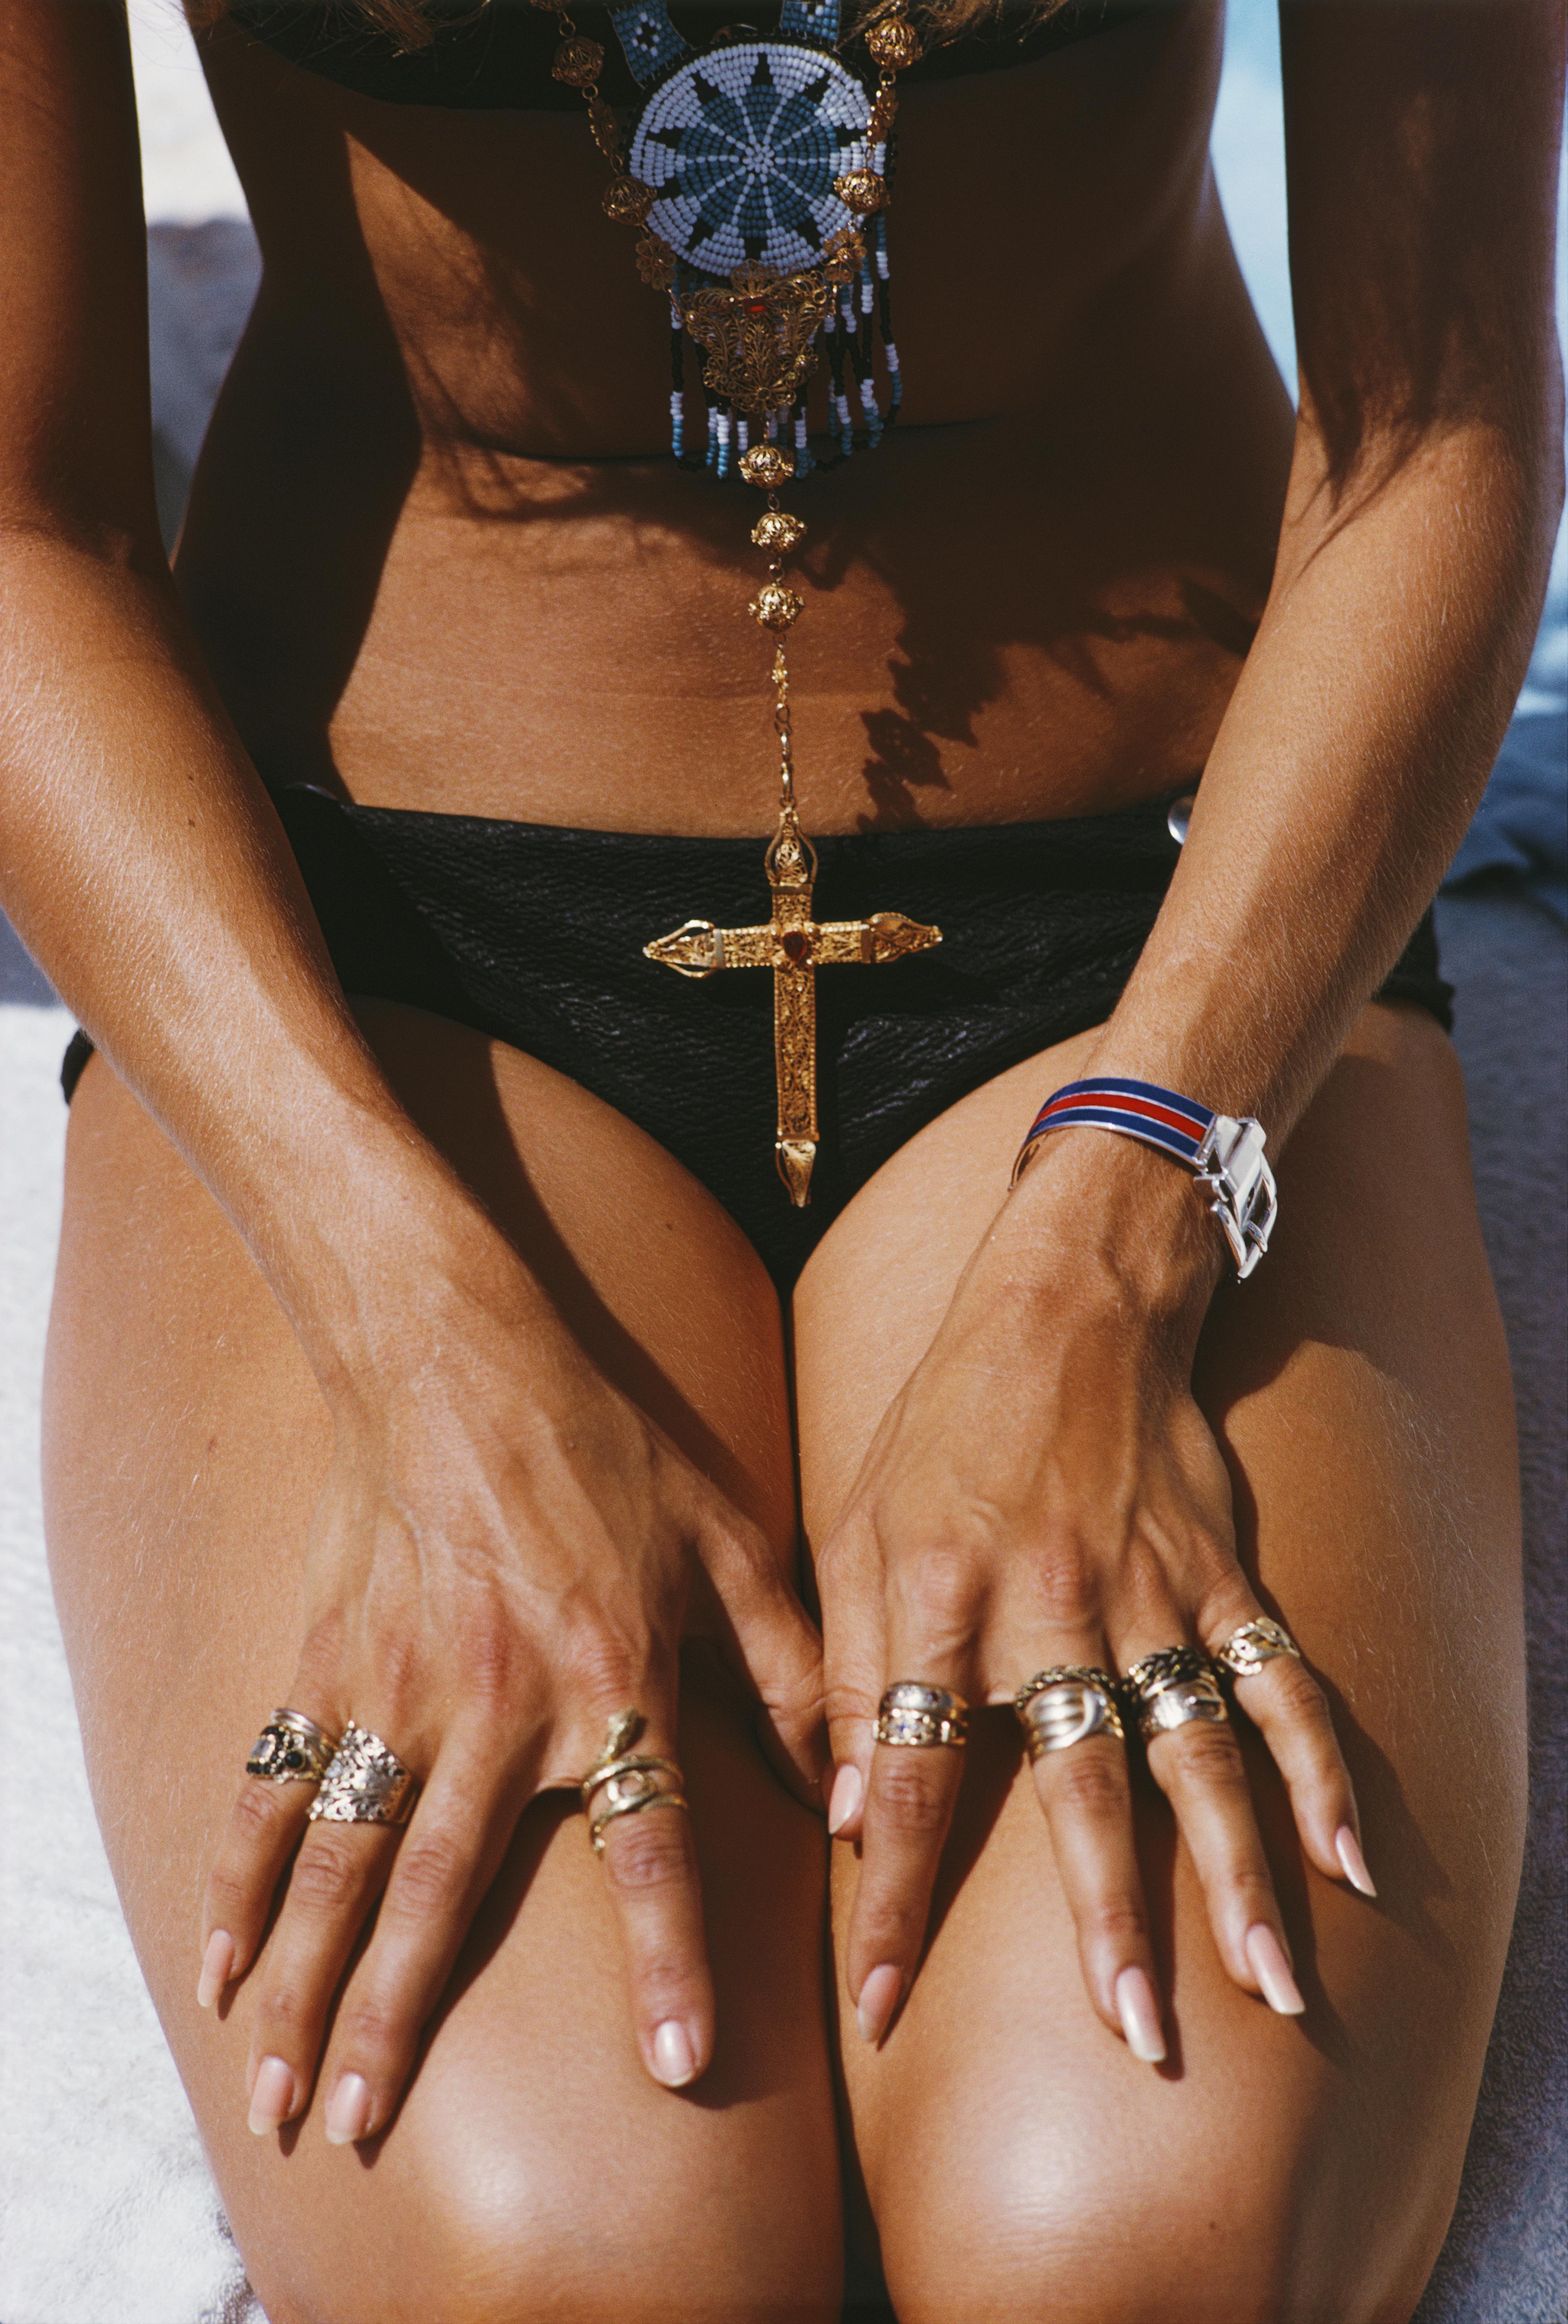 1968, A kneeling sunbather shows off her rings and pendant on a beach in Capri, Italy.

Slim Aarons
Capri Tan
Hotel Punta Tragara, Capri, Italy
Chromogenic Lambda print
Printed Later
Slim Aarons Estate Edition
Complimentary dealer shipping to your